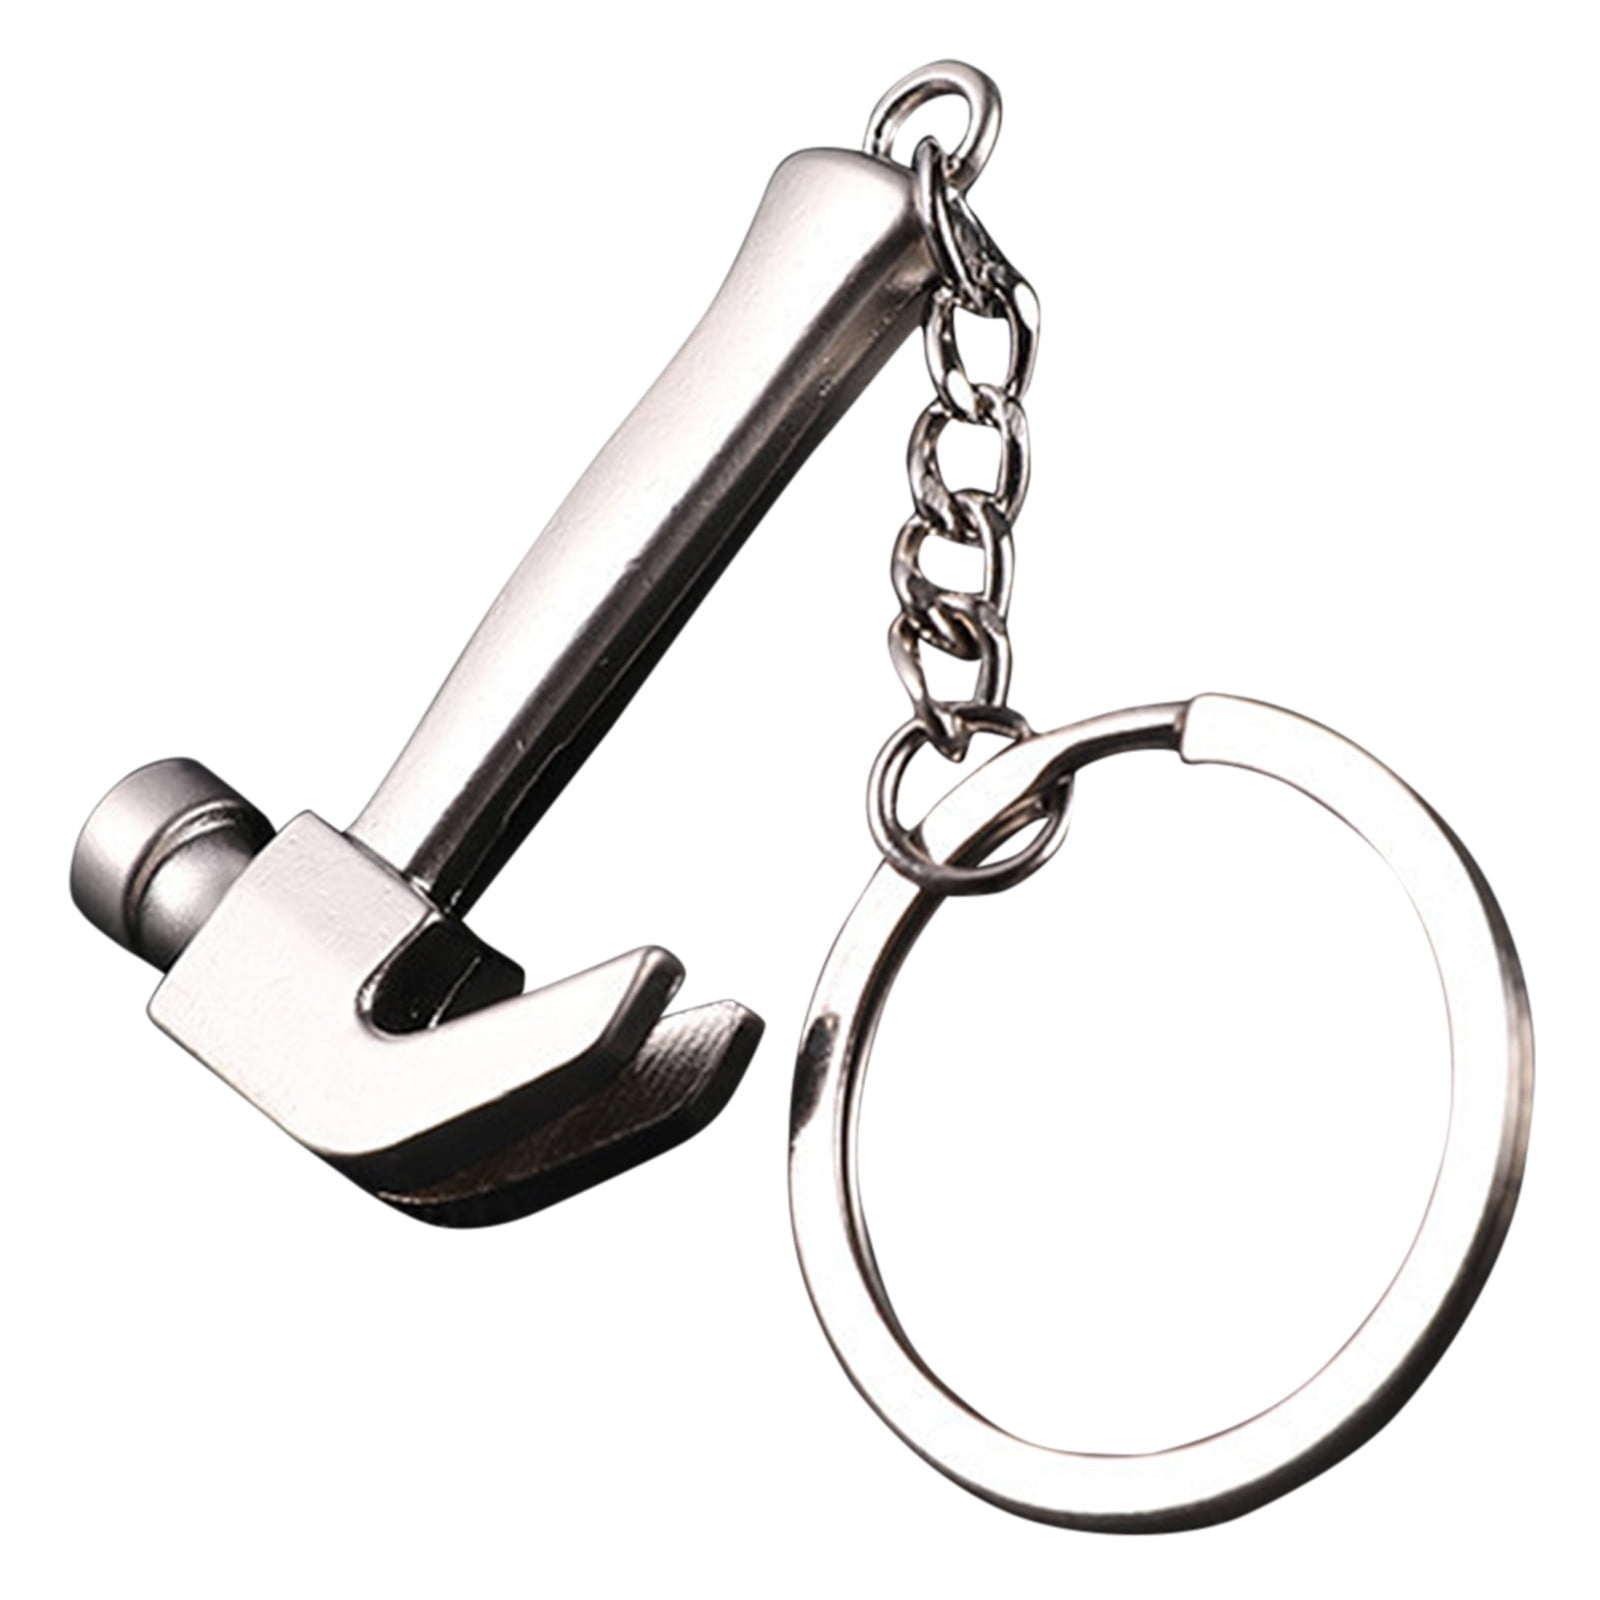 Stainless steel Adjustable Creative Wrench Spanner Key Chain Ring Keyring Tool ! 